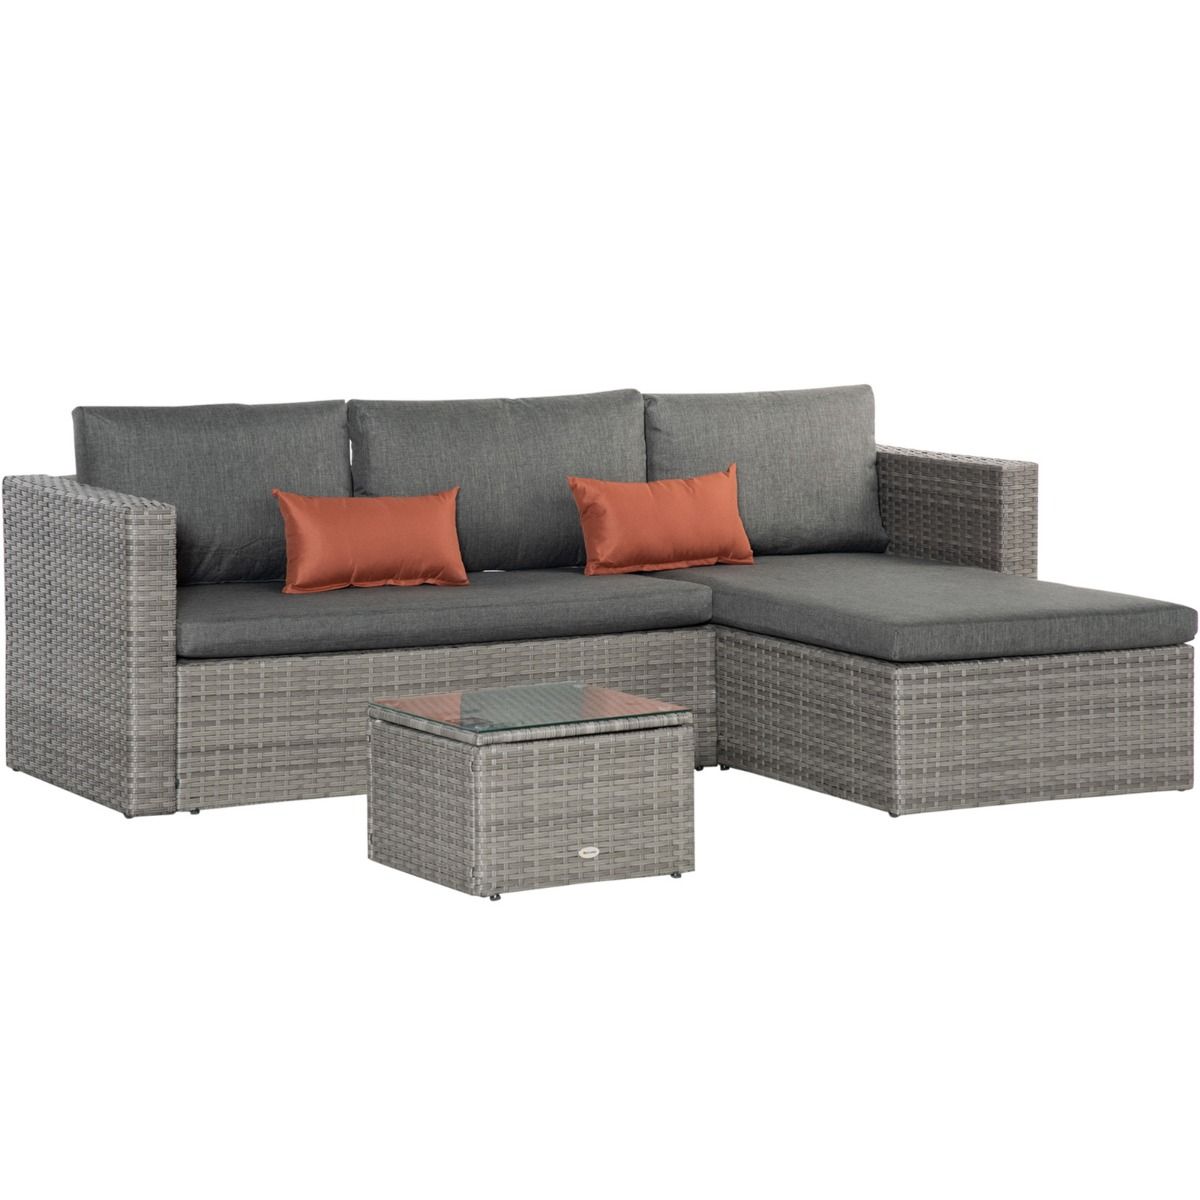 Outsunny Rattan Sofa Set With Coffee Table, 3 Piece - Grey